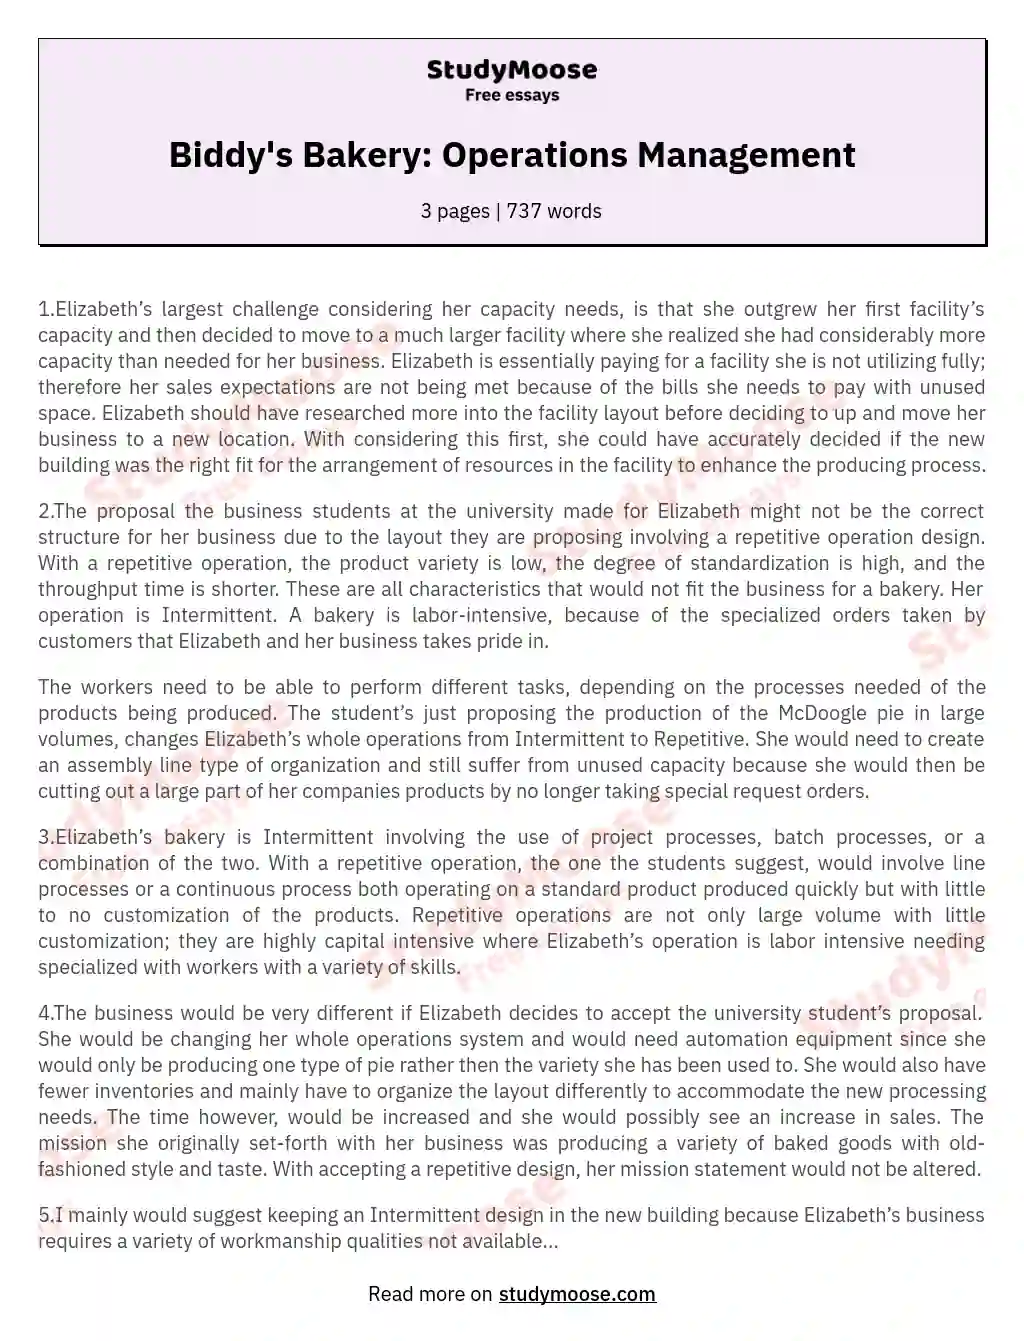 Biddy's Bakery: Operations Management essay